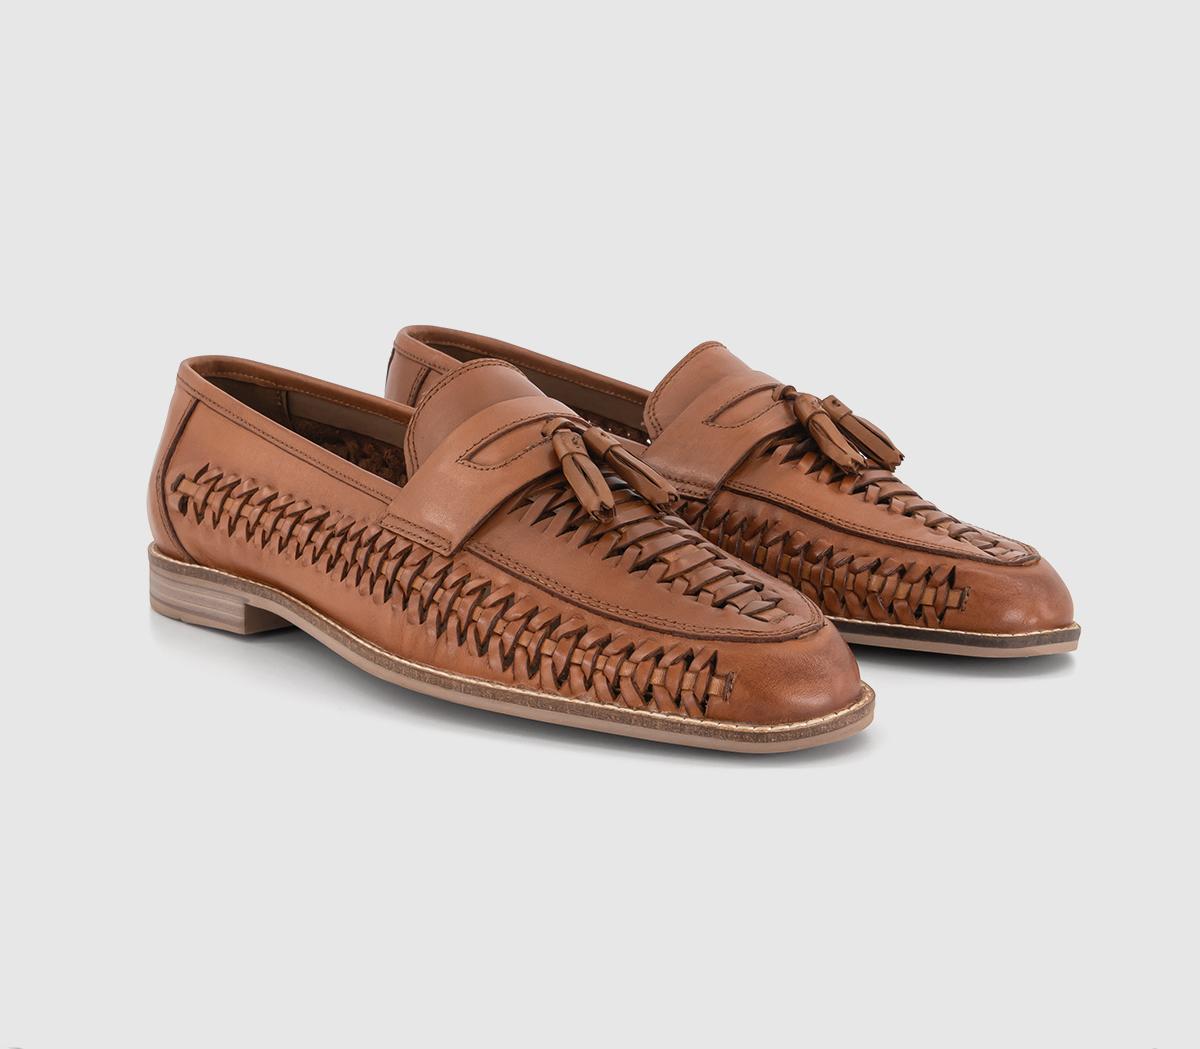 OFFICE Mens Clapham Tassel Woven Loafers Tan Leather, 6